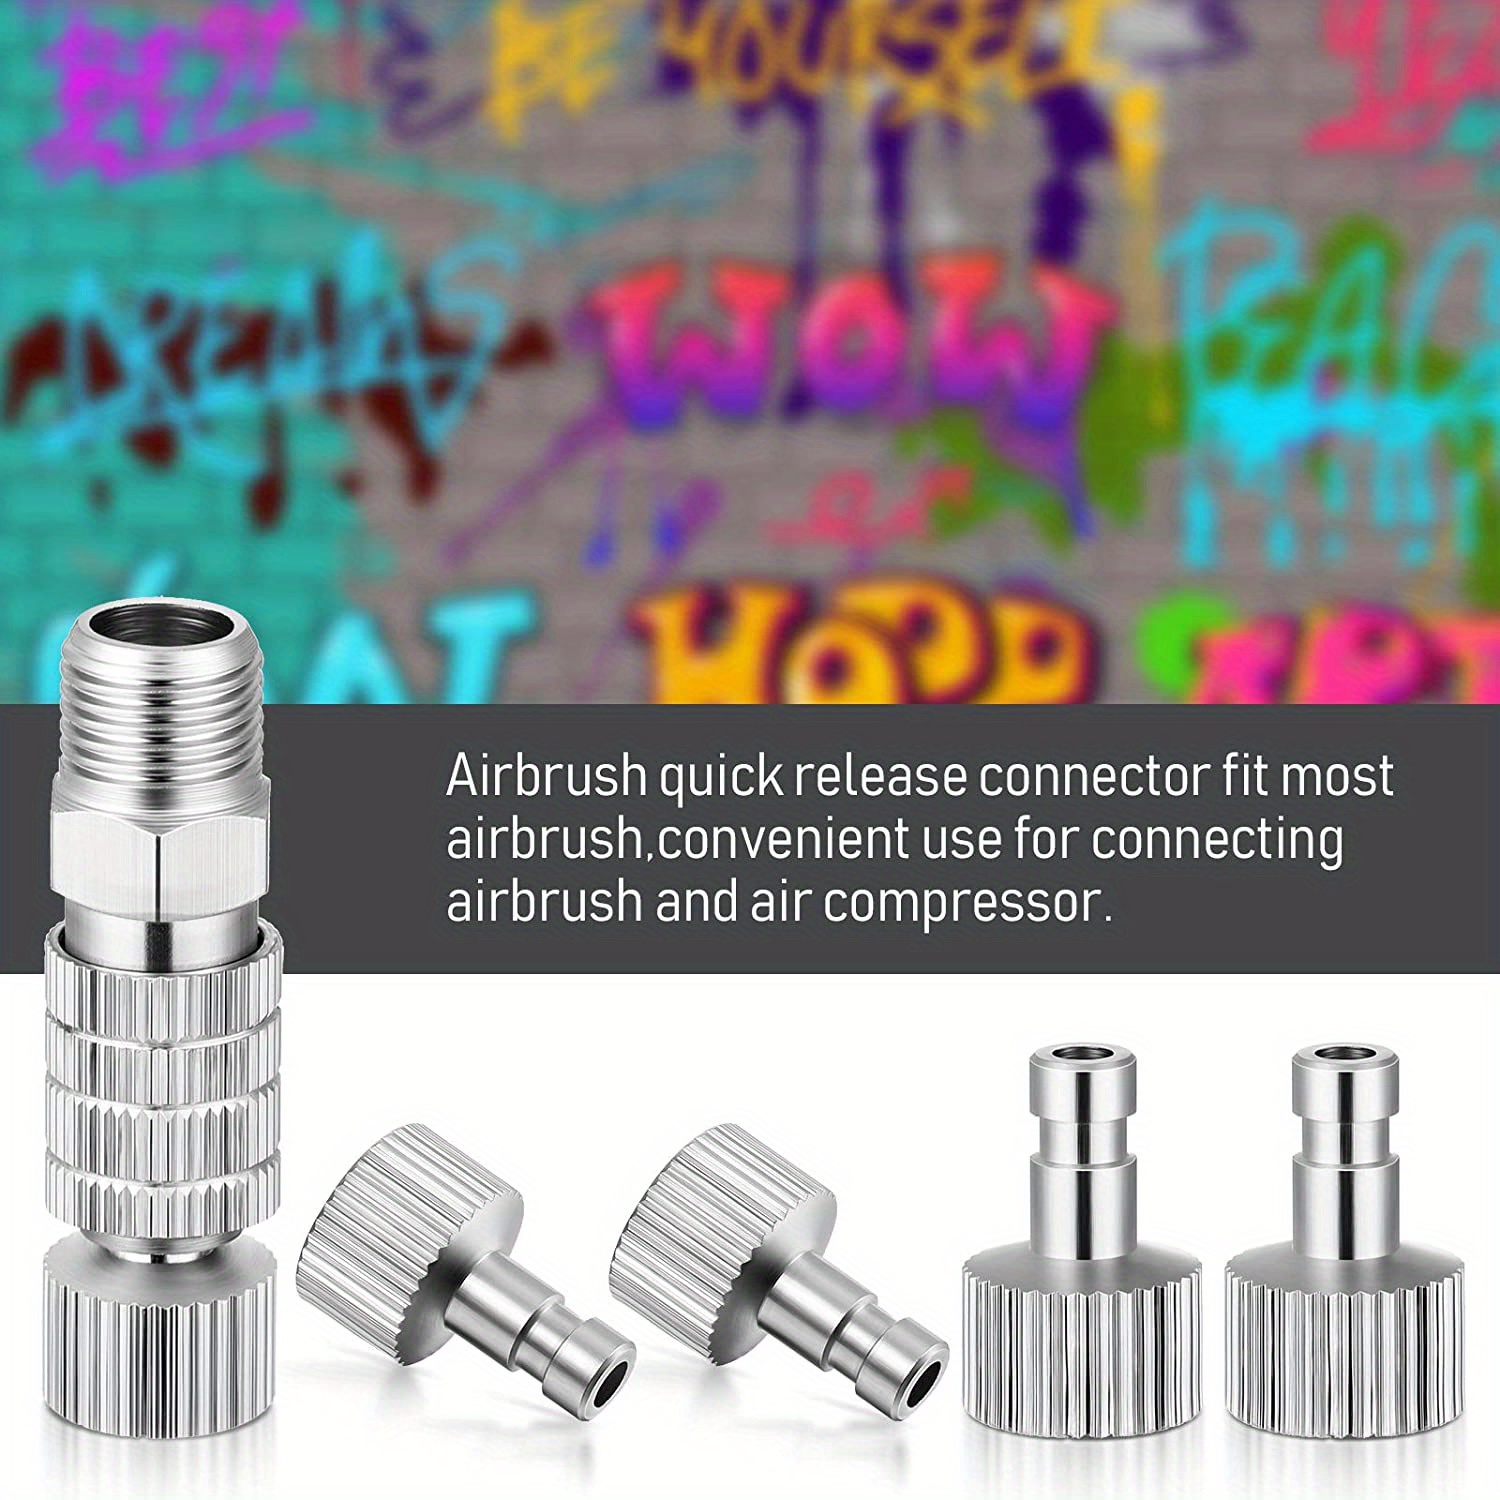 HUBEST 8 Pieces Airbrush Flexible Adapter Fitting Connector Set Airbrush  connector kit Airbrush Threaded Plug for Connecting for Compressor and